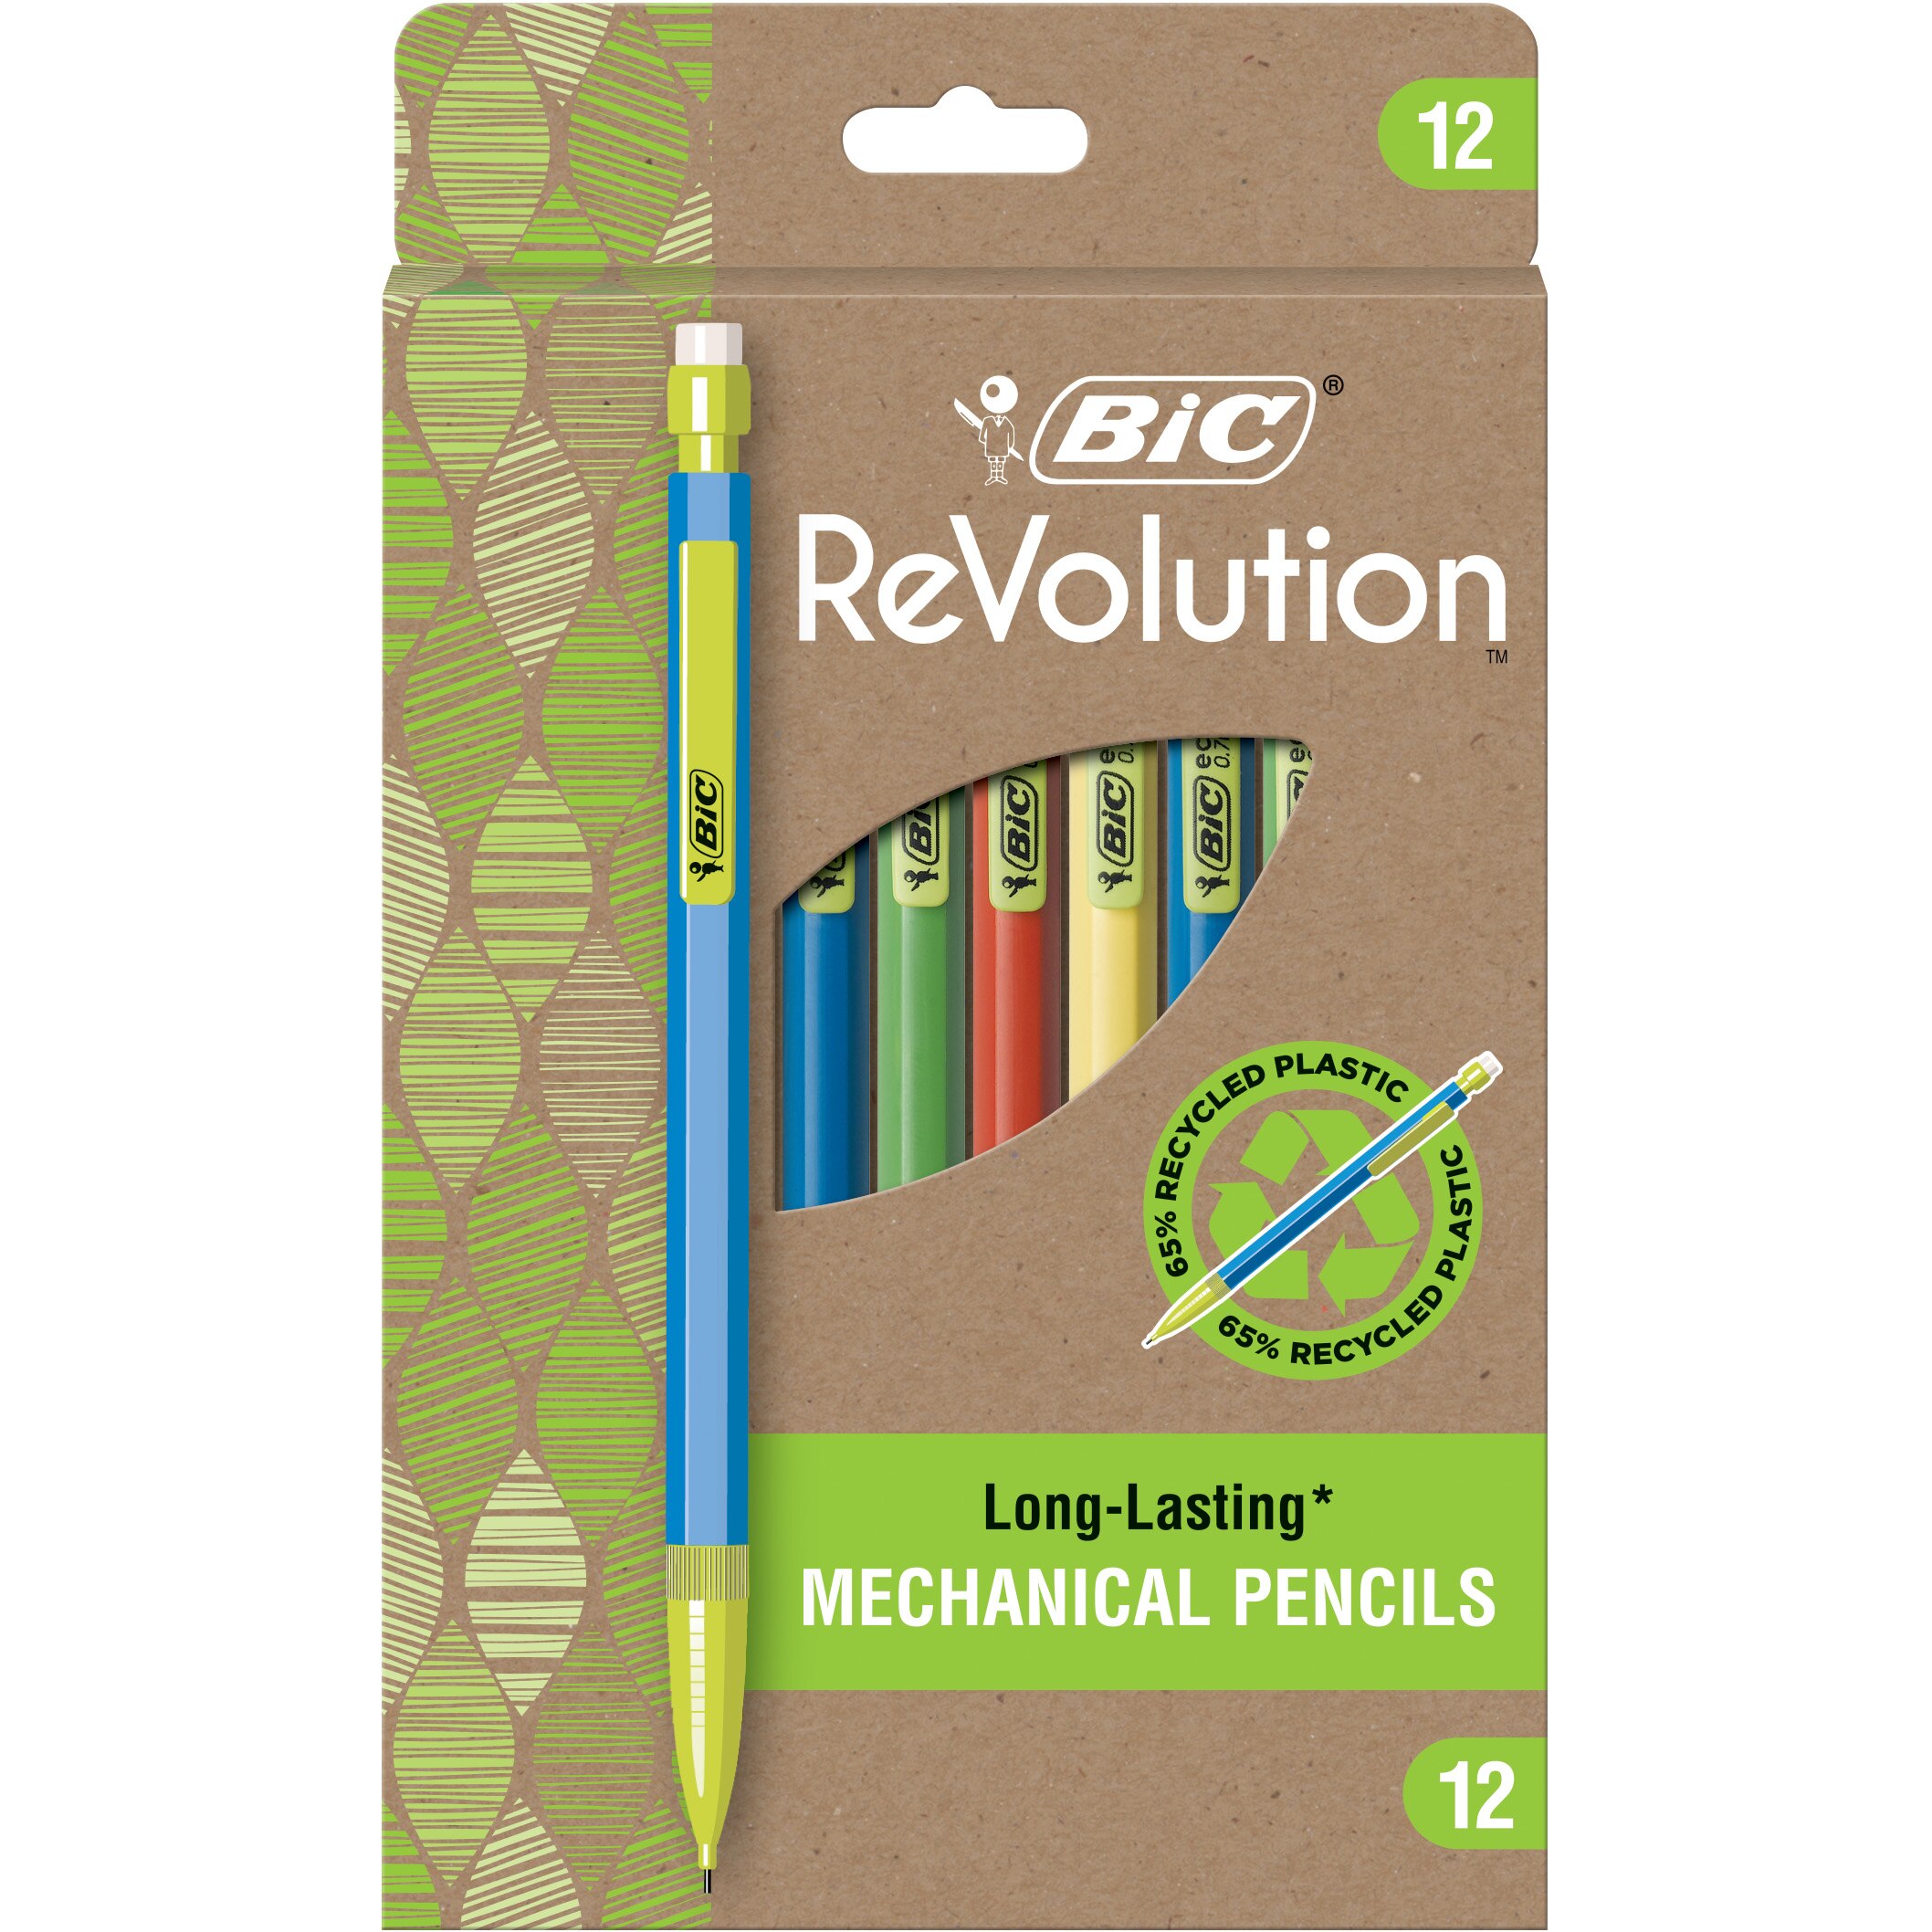 BIC ReVolution #2 Mechanical Pencil, 0.7mm Lead, Assorted Colors, 12-Pack